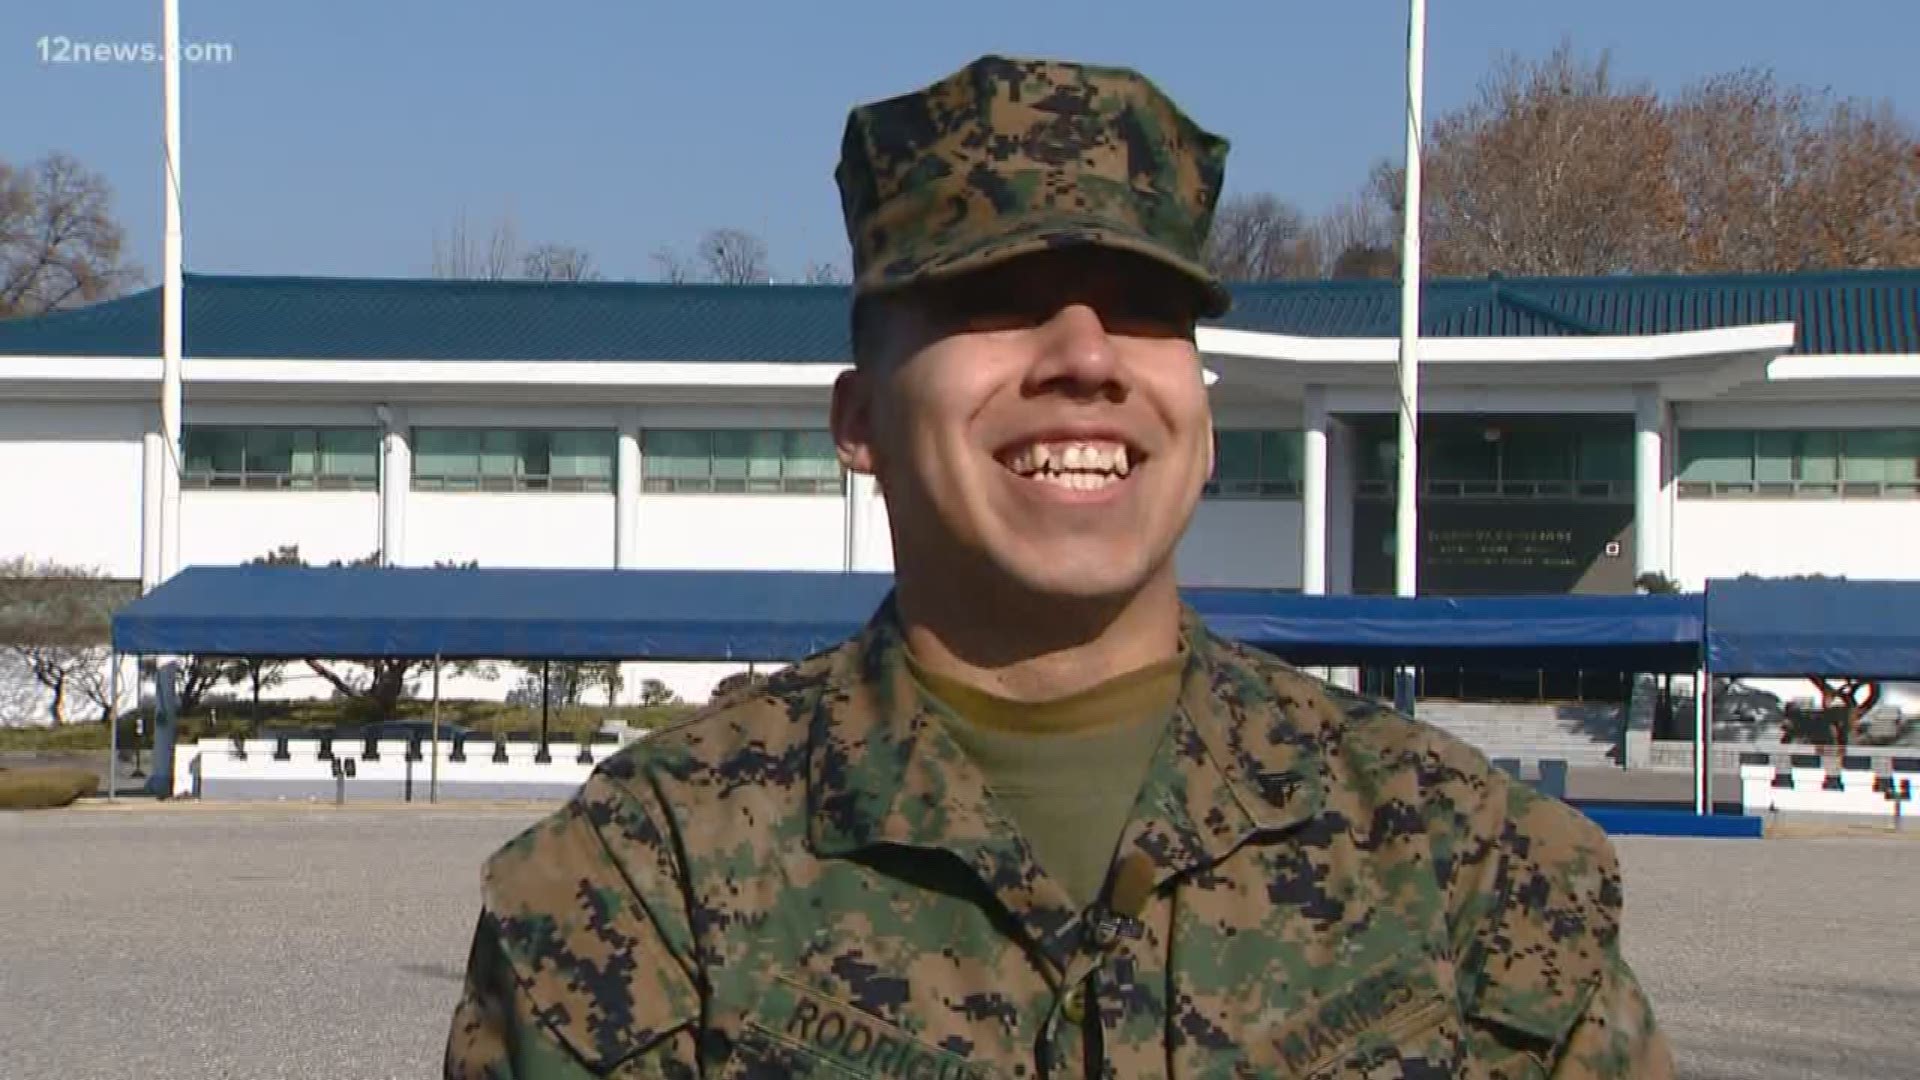 Corporal Daniel Rodriguez's South Korea journey started just a week ago. He is currently at the U.S. Army Garrison Yongsan base in Seoul, South Korea.